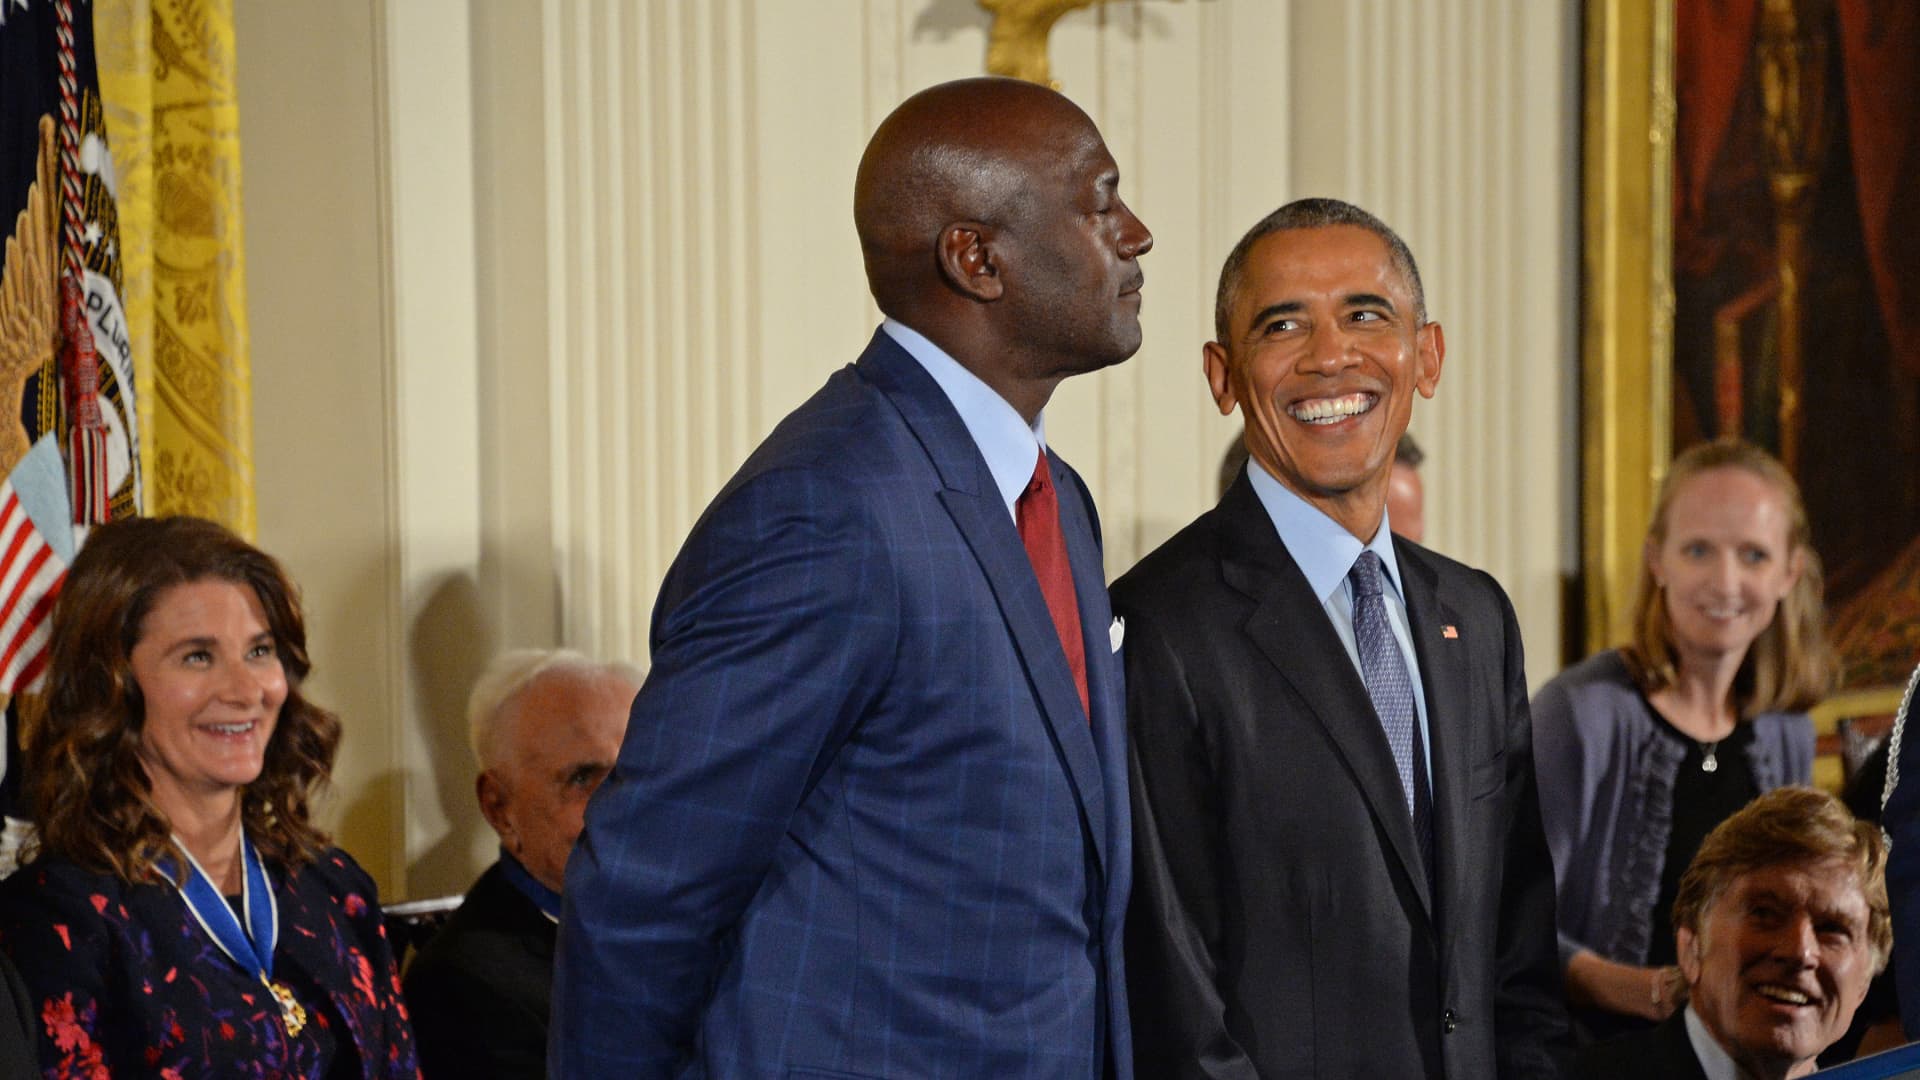 Barack Obama couldn't afford a Bulls ticket when MJ came to Chicago